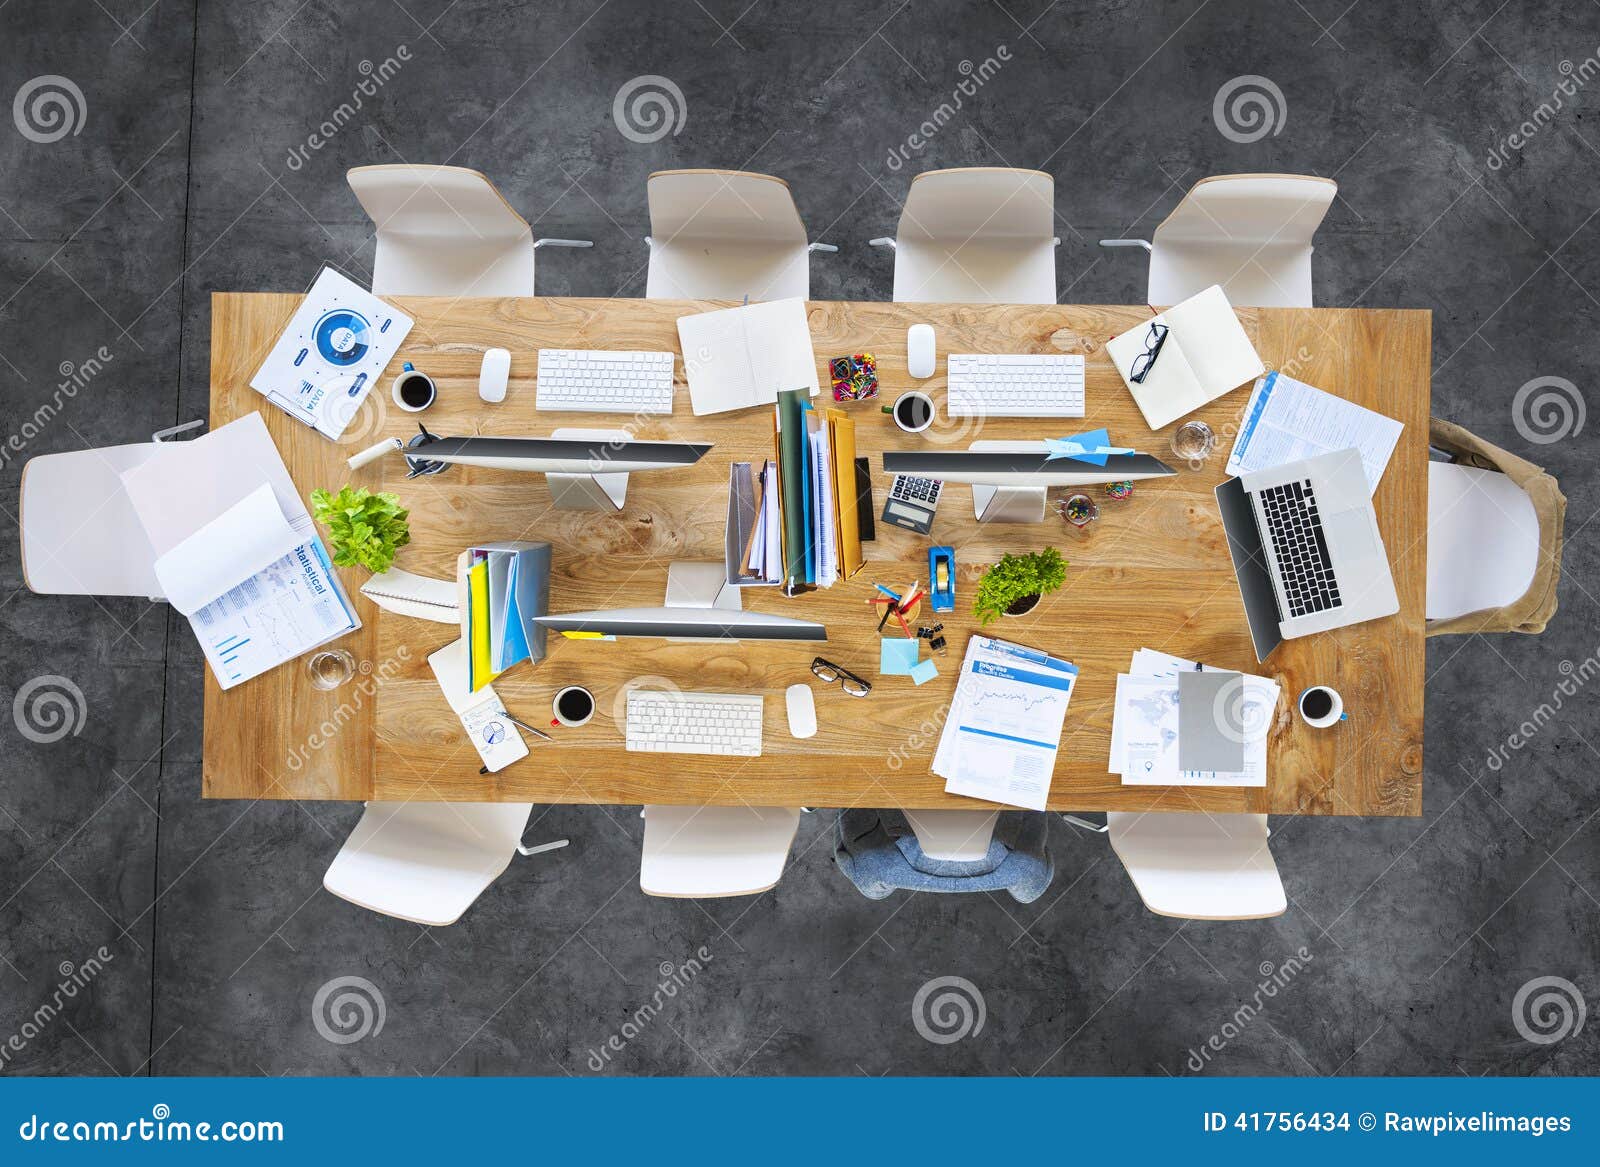 contemporary office table with equipments and chairs